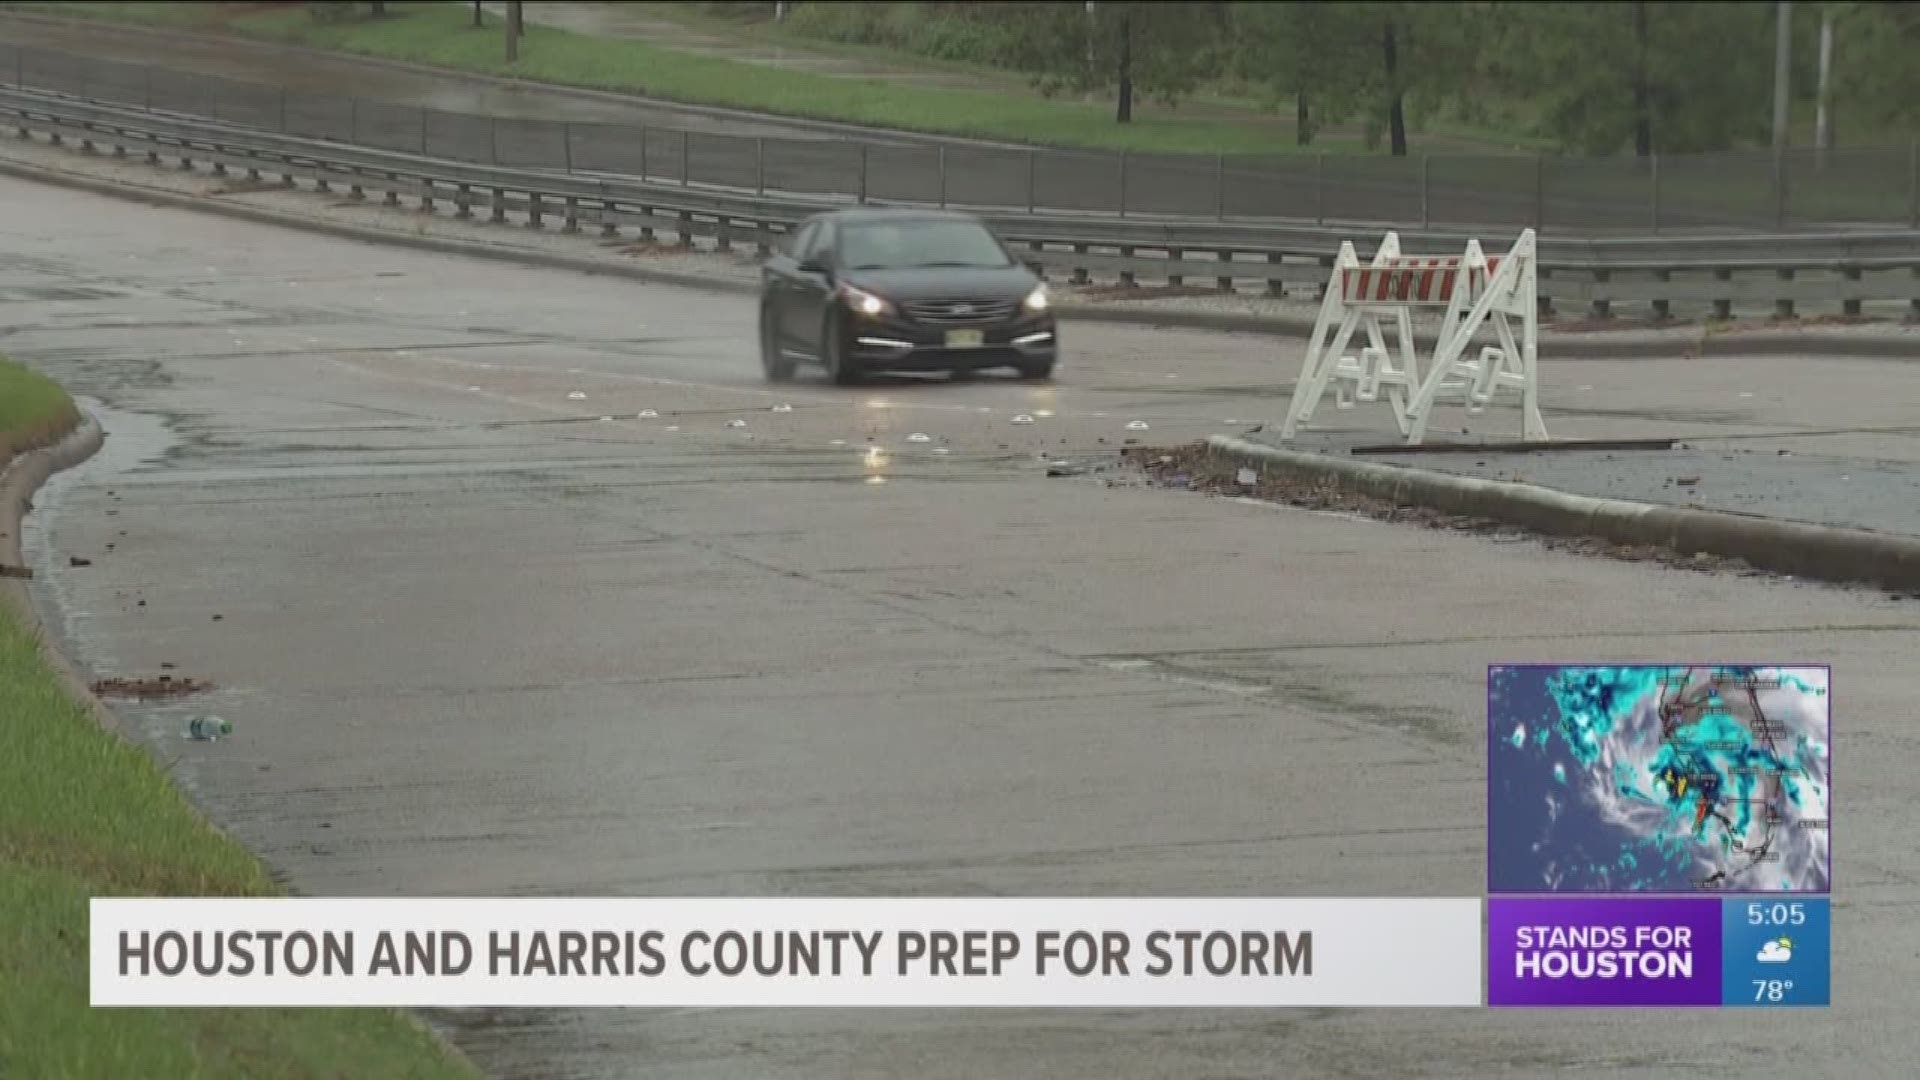 County and city officials are prepared for possible heavy rainfall in the Houston area this week.